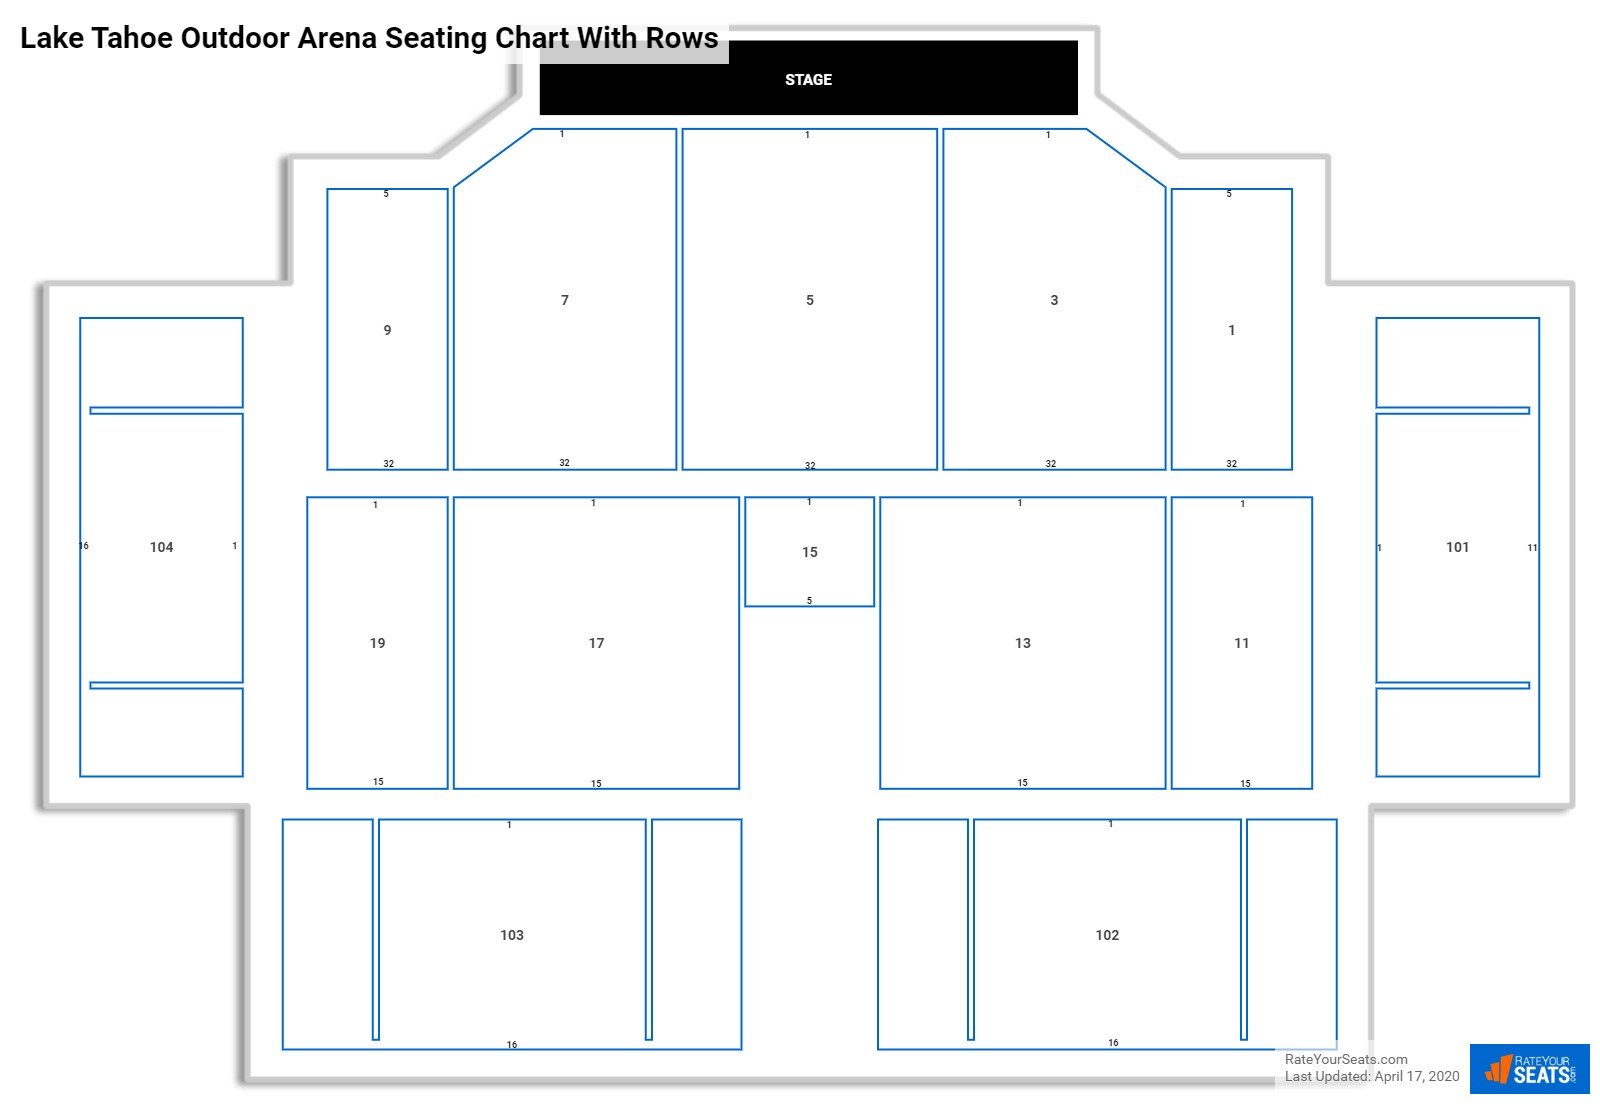 Lake Tahoe Outdoor Arena seating chart with row numbers